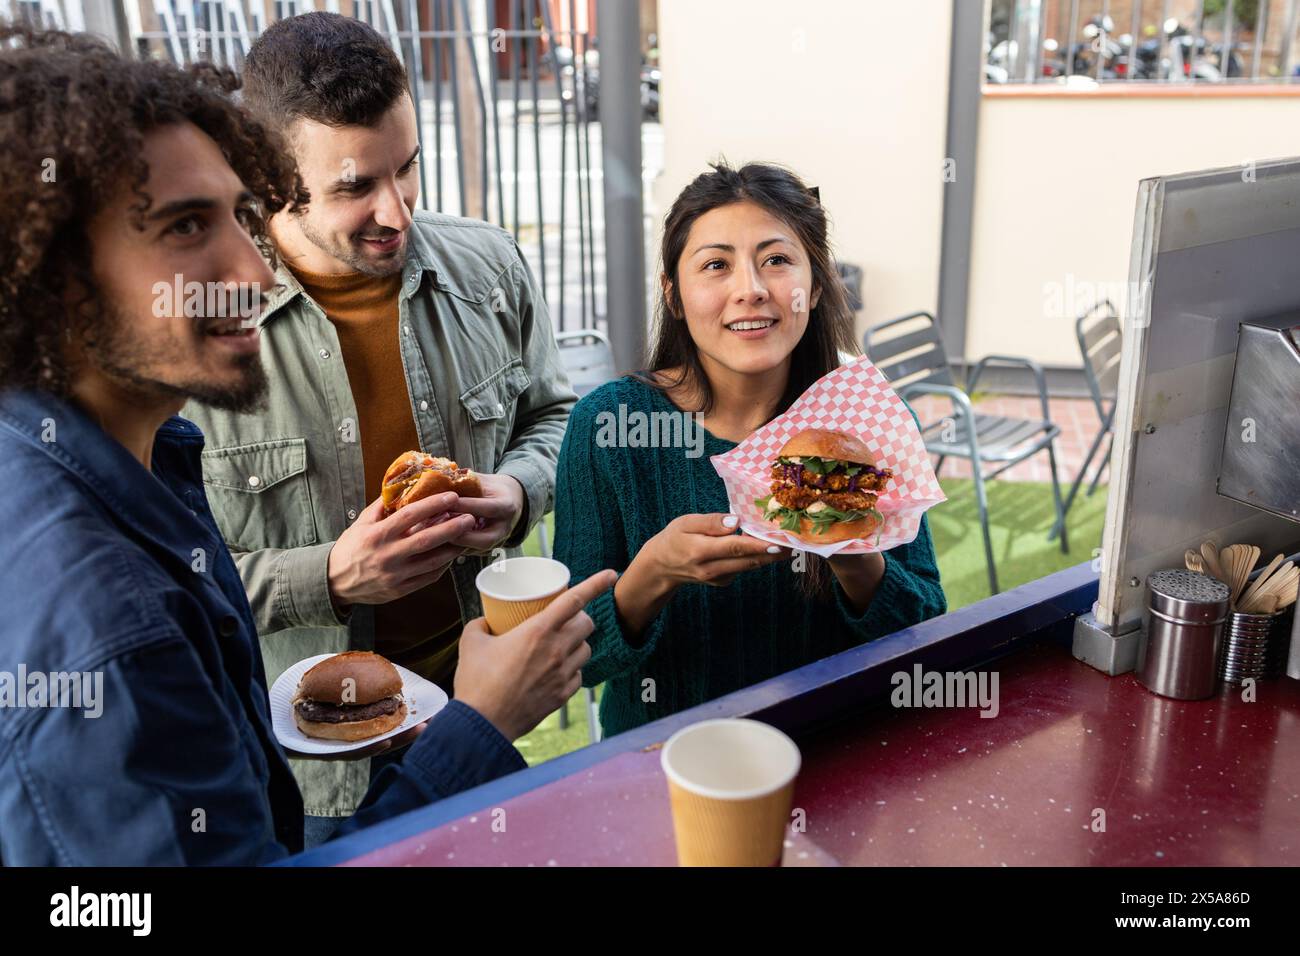 A diverse group of friends shares a moment of joy while eating gourmet street food served from a food truck, showcasing urban lifestyle and friendship Stock Photo